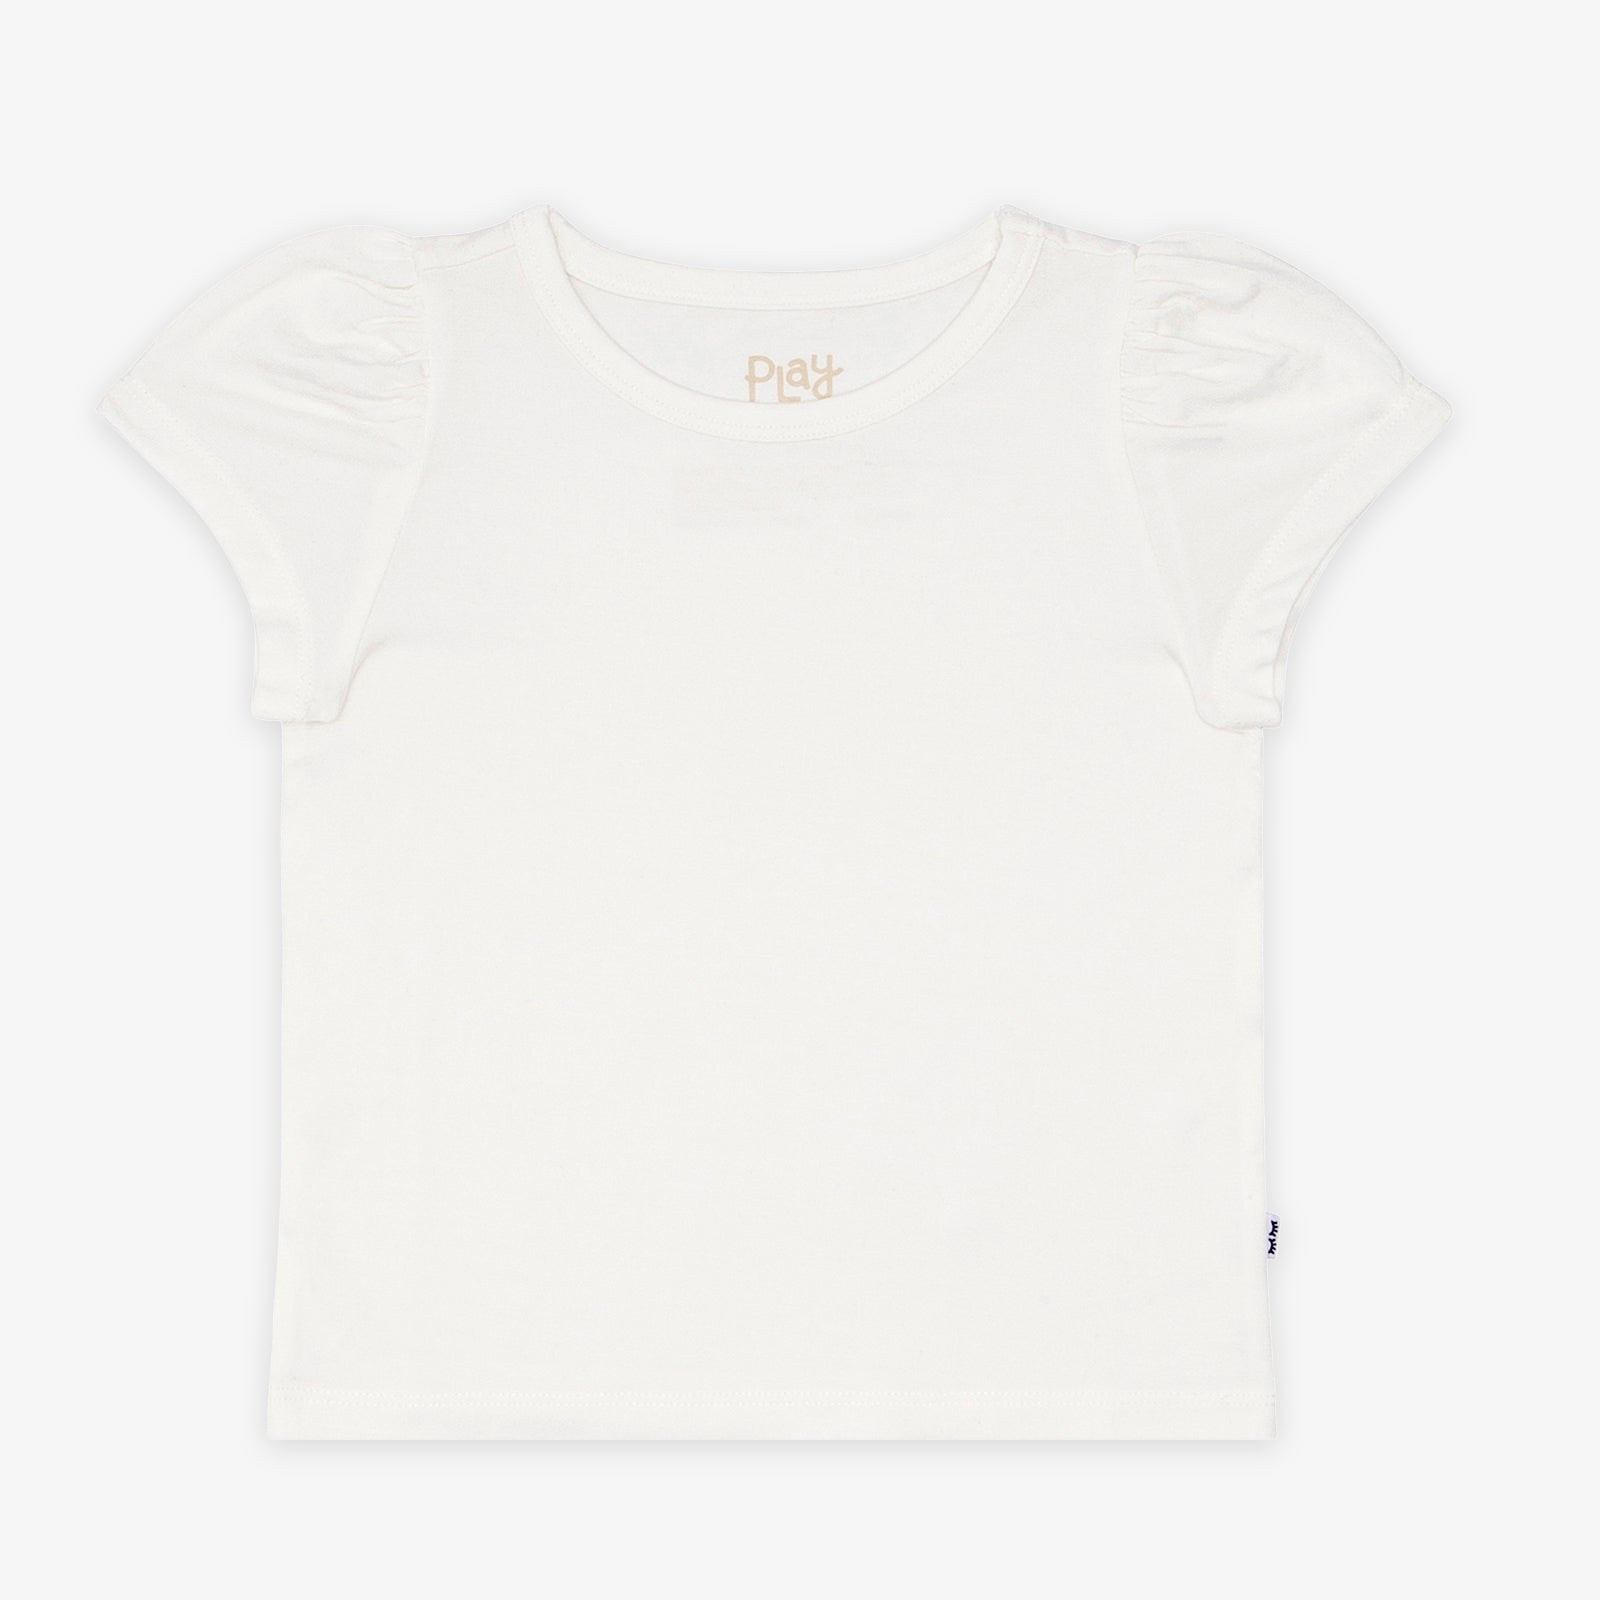 Flat lay image of a soft White Puff sleeve tee